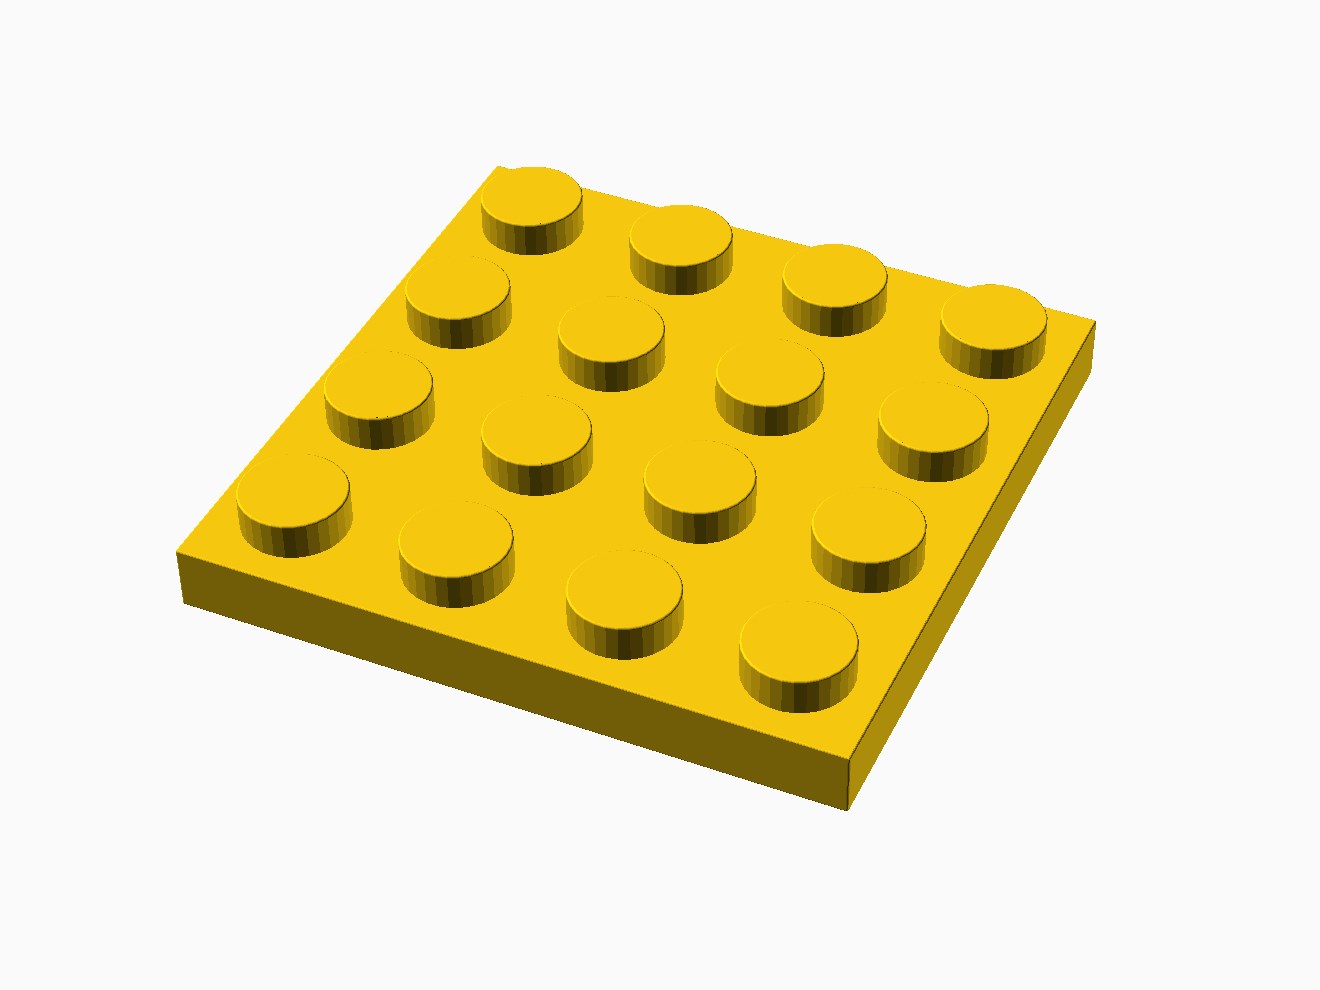 3D printable model of a LEGO 4x4 Plate with standard knobs.